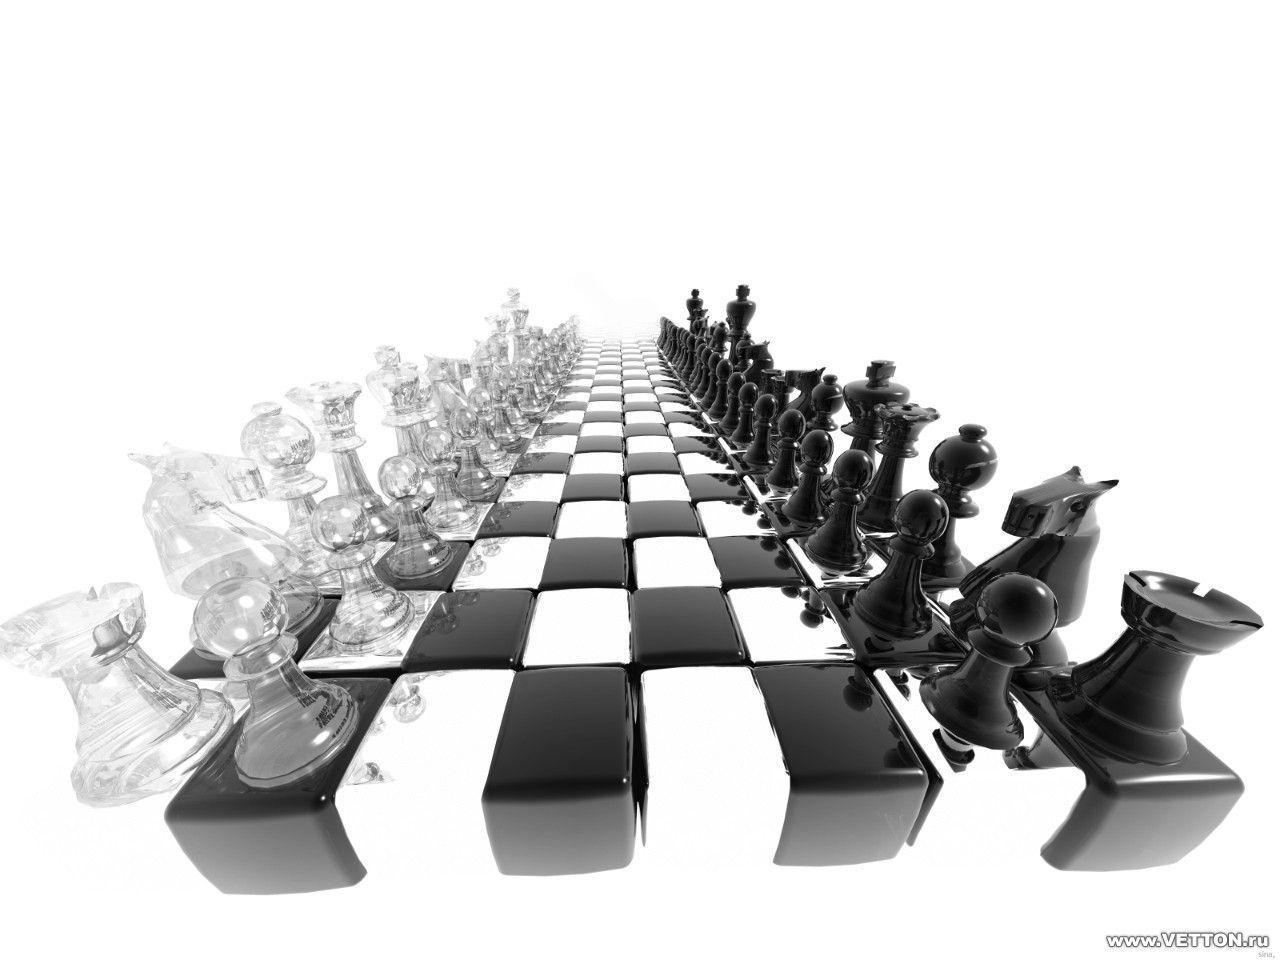 The Image of Abstract Chess Board Games Chess Pieces Fresh HD